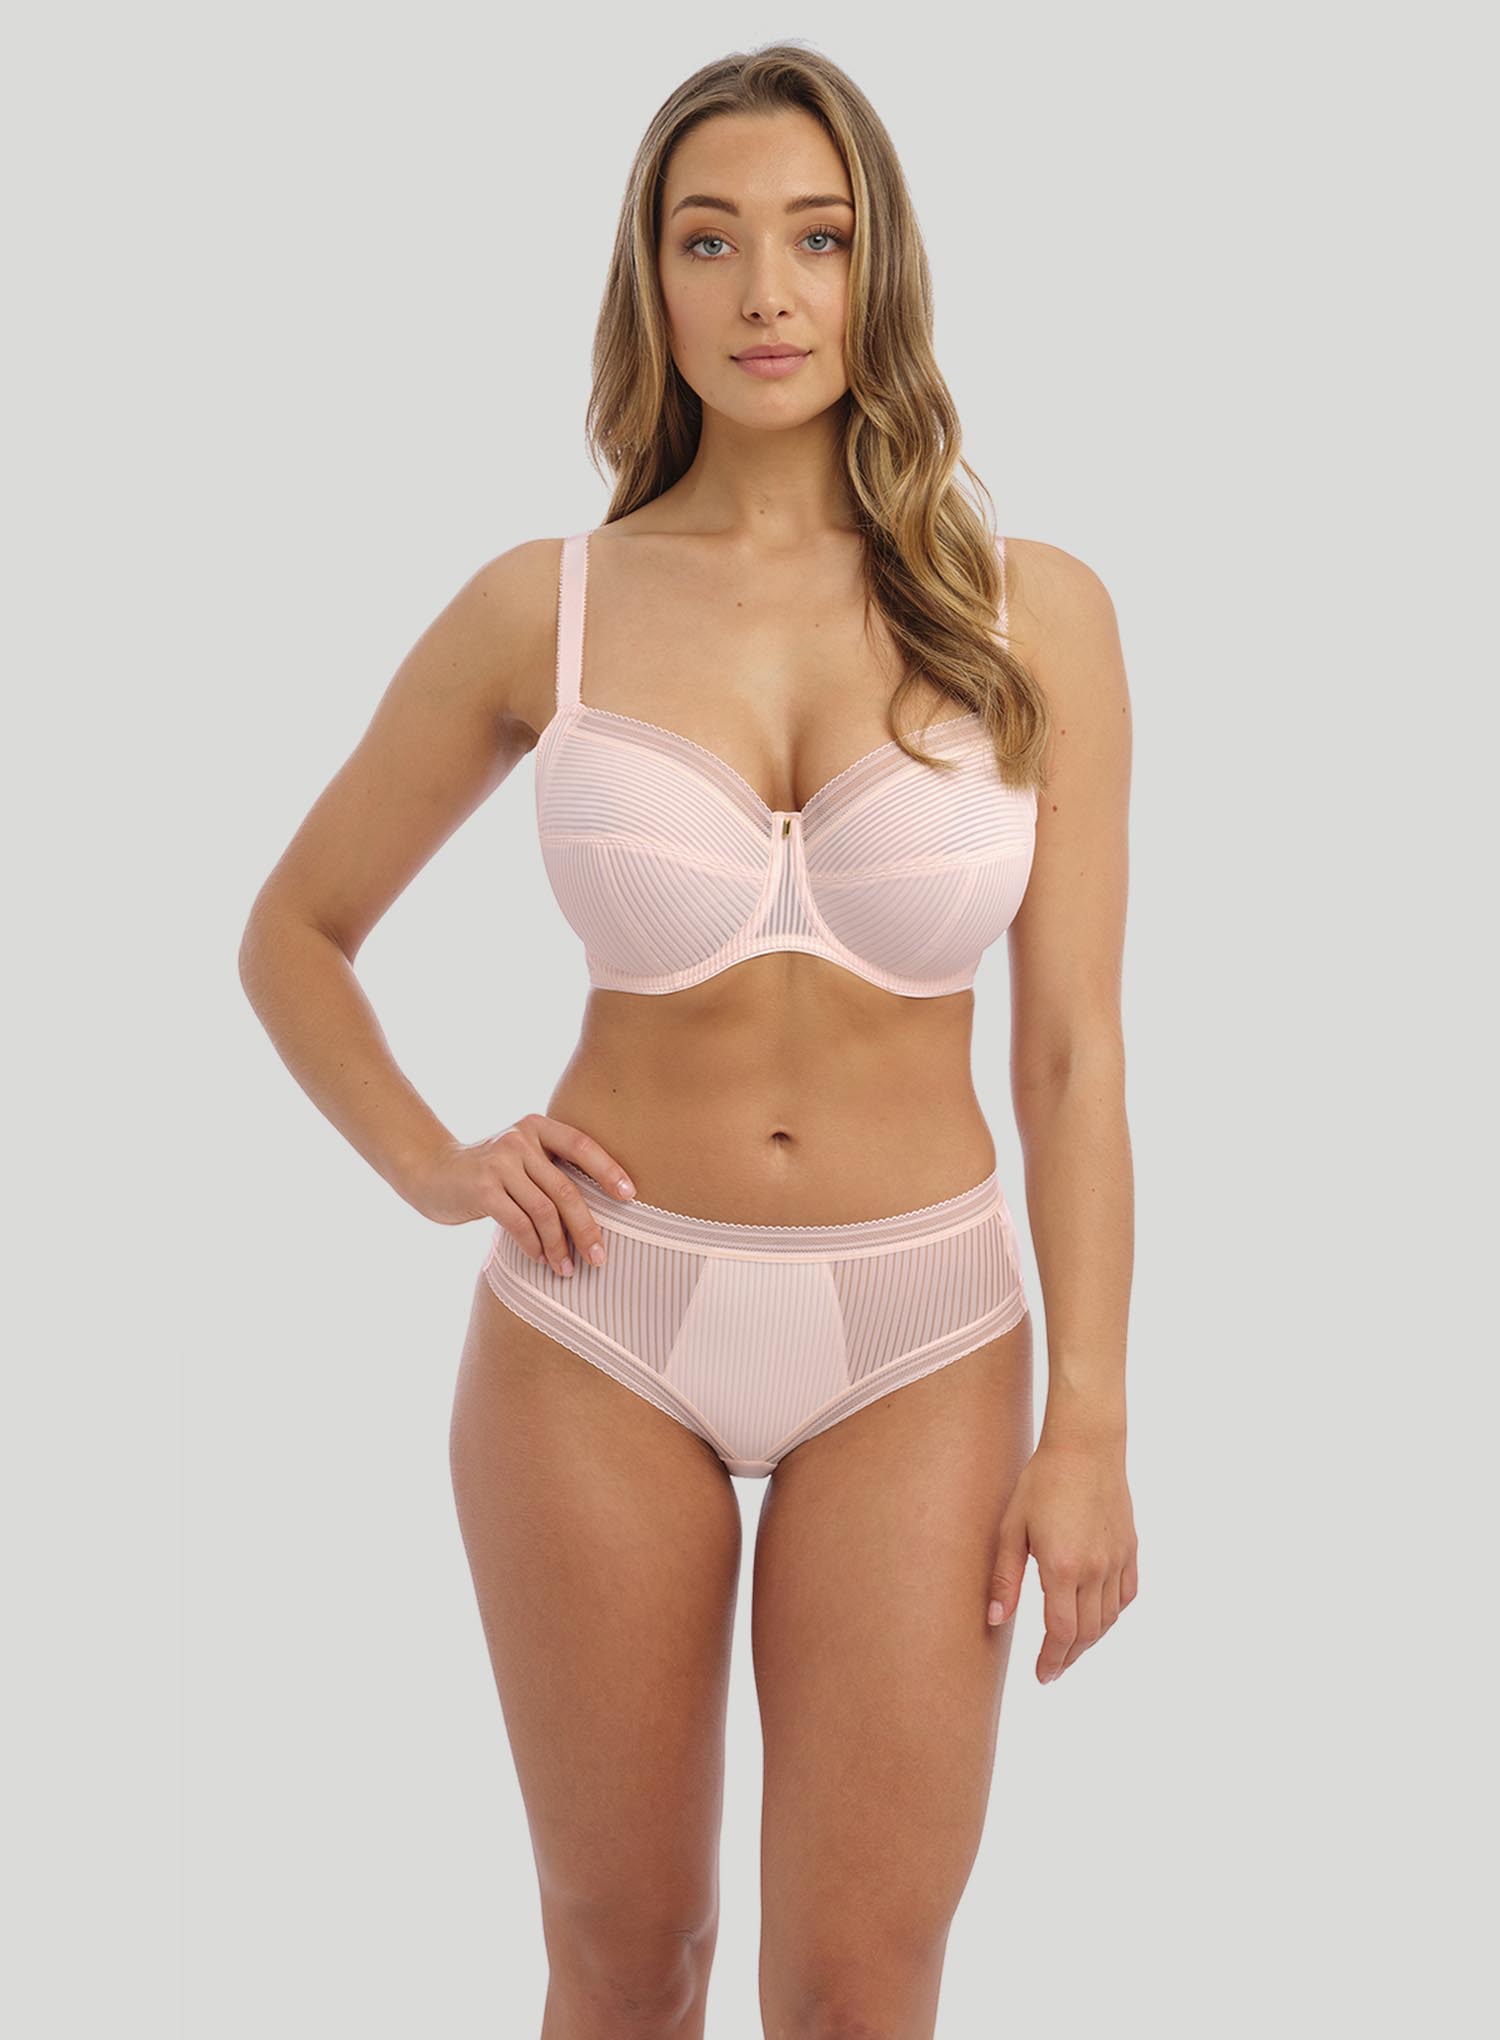 Fantasie Fusion Bra Blush Pink Size 34G Underwired Full Cup Side Support  3091